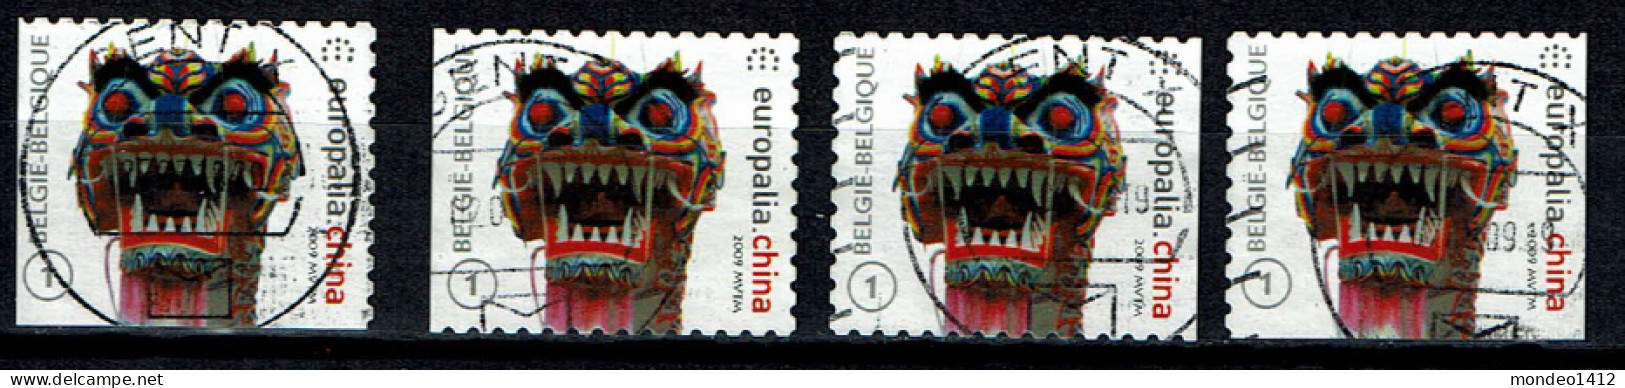 België OBP 3968 - Europalia 2009 - Self Adhesive Stamp From Booklet  Complete - Gebraucht